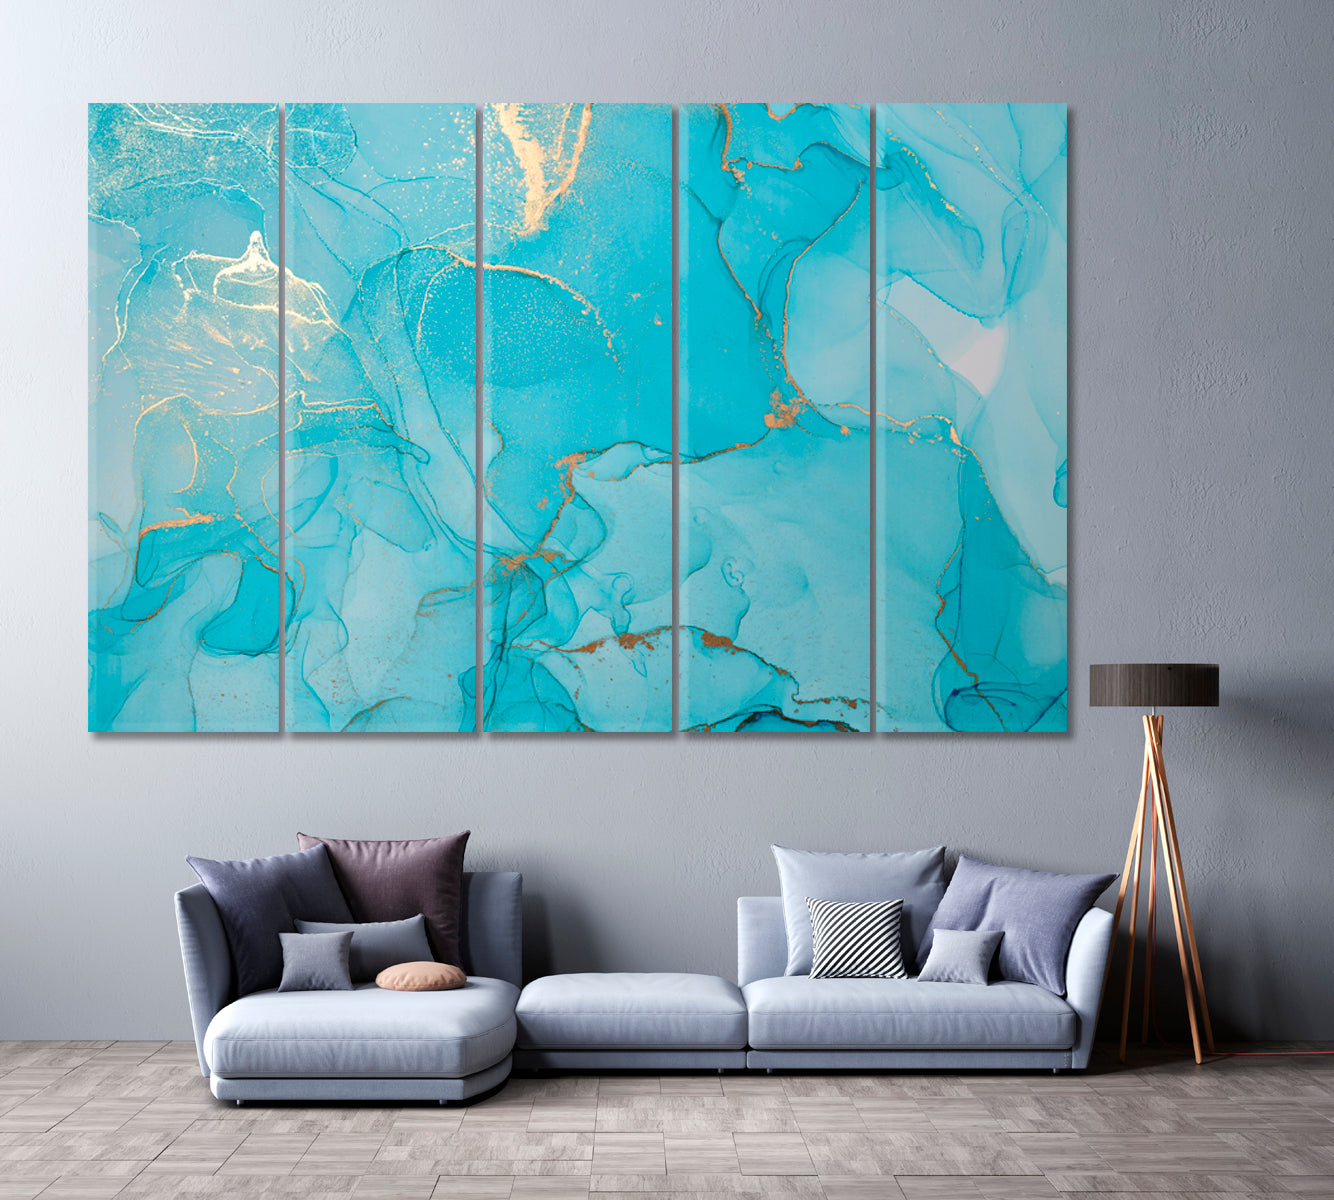 Ink Marble Effect Canvas Print ArtLexy 5 Panels 36"x24" inches 